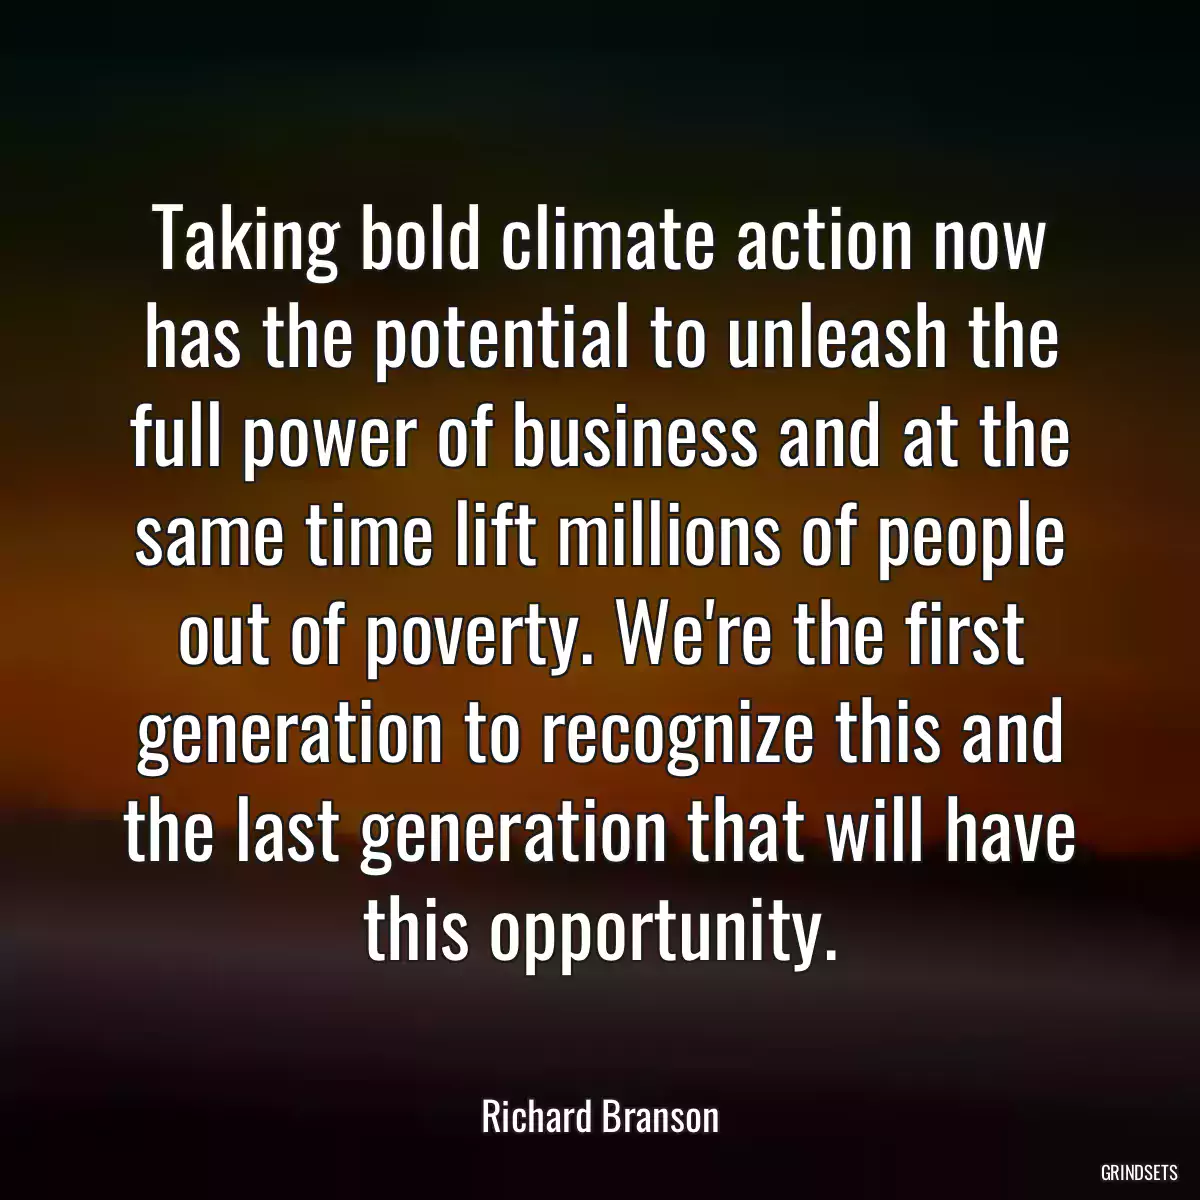 Taking bold climate action now has the potential to unleash the full power of business and at the same time lift millions of people out of poverty. We\'re the first generation to recognize this and the last generation that will have this opportunity.